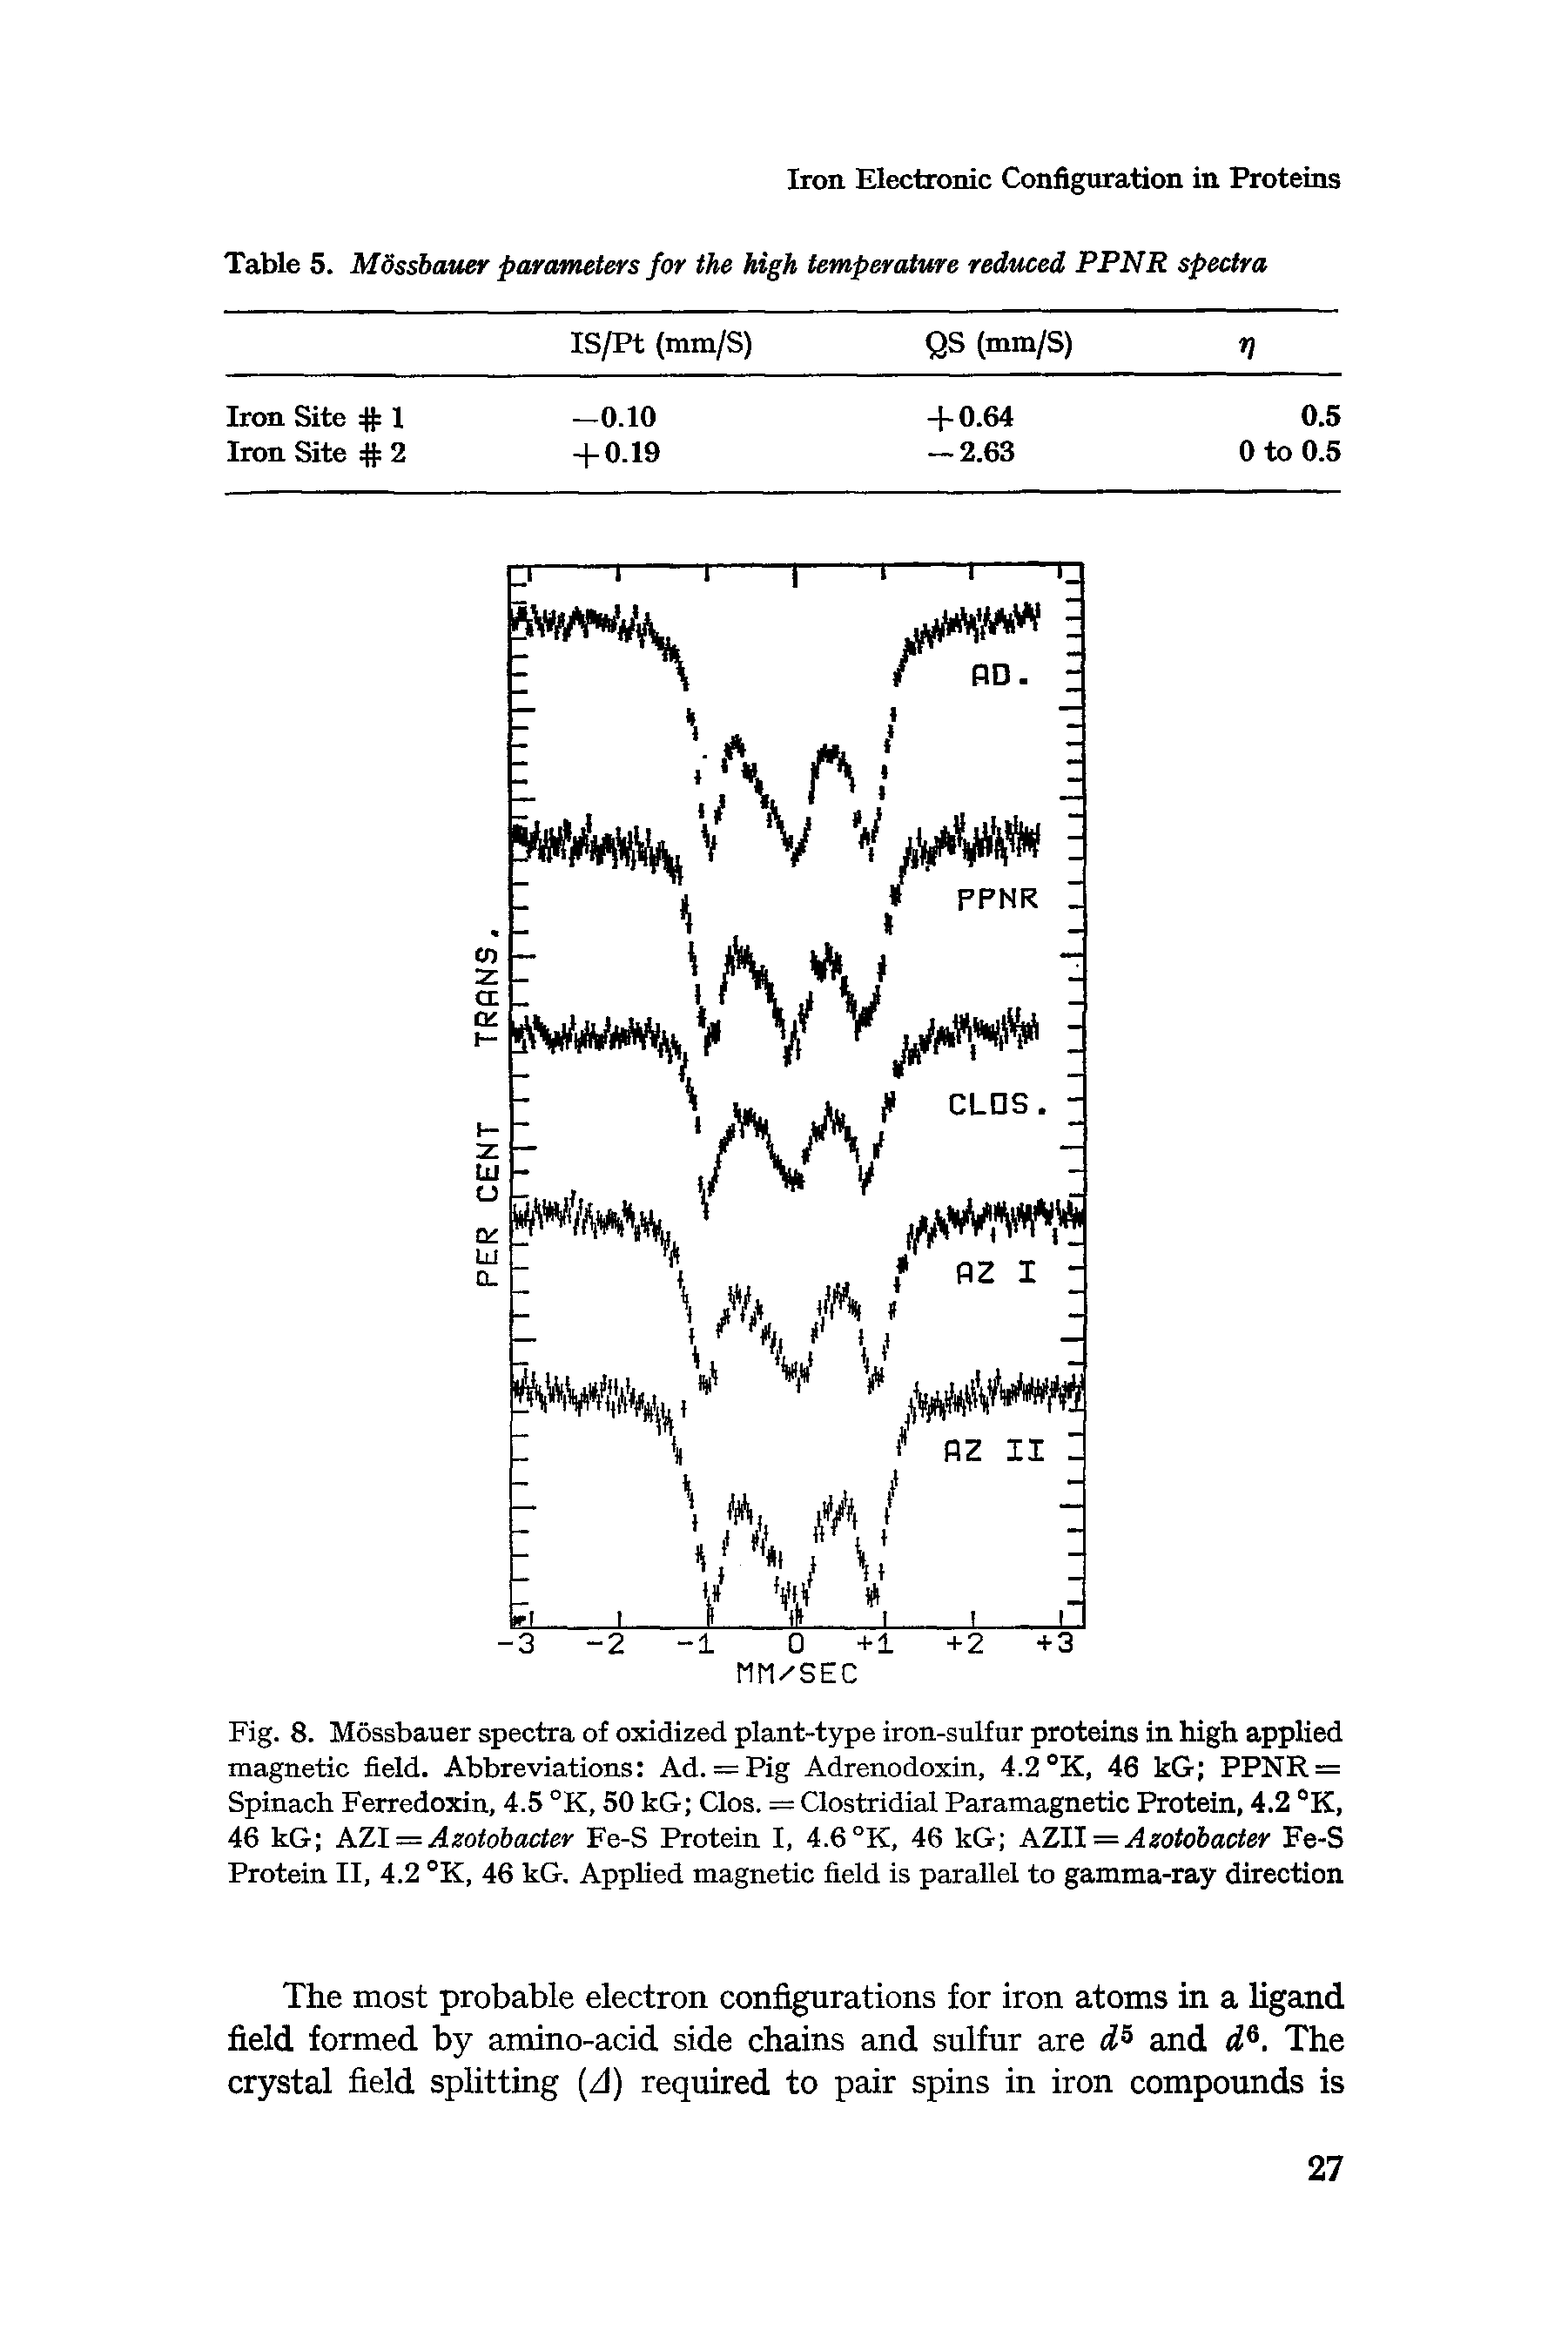 Fig. 8. Mossbauer spectra of oxidized plant-type iron-sulfur proteins in high applied magnetic field. Abbreviations Ad. = Pig Adrenodoxin, 4.2 °K, 46 kG PPNR = Spinach Ferredoxin, 4.5 °K, 50 kG Clos. = Clostridial Paramagnetic Protein, 4.2 °K, 46 kG AZI = Azotobacter Fe-S Protein I, 4.6°K, 46 kG AZII = Azotobacter Fe-S Protein II, 4.2 °K, 46 kG. Applied magnetic field is parallel to gamma-ray direction...